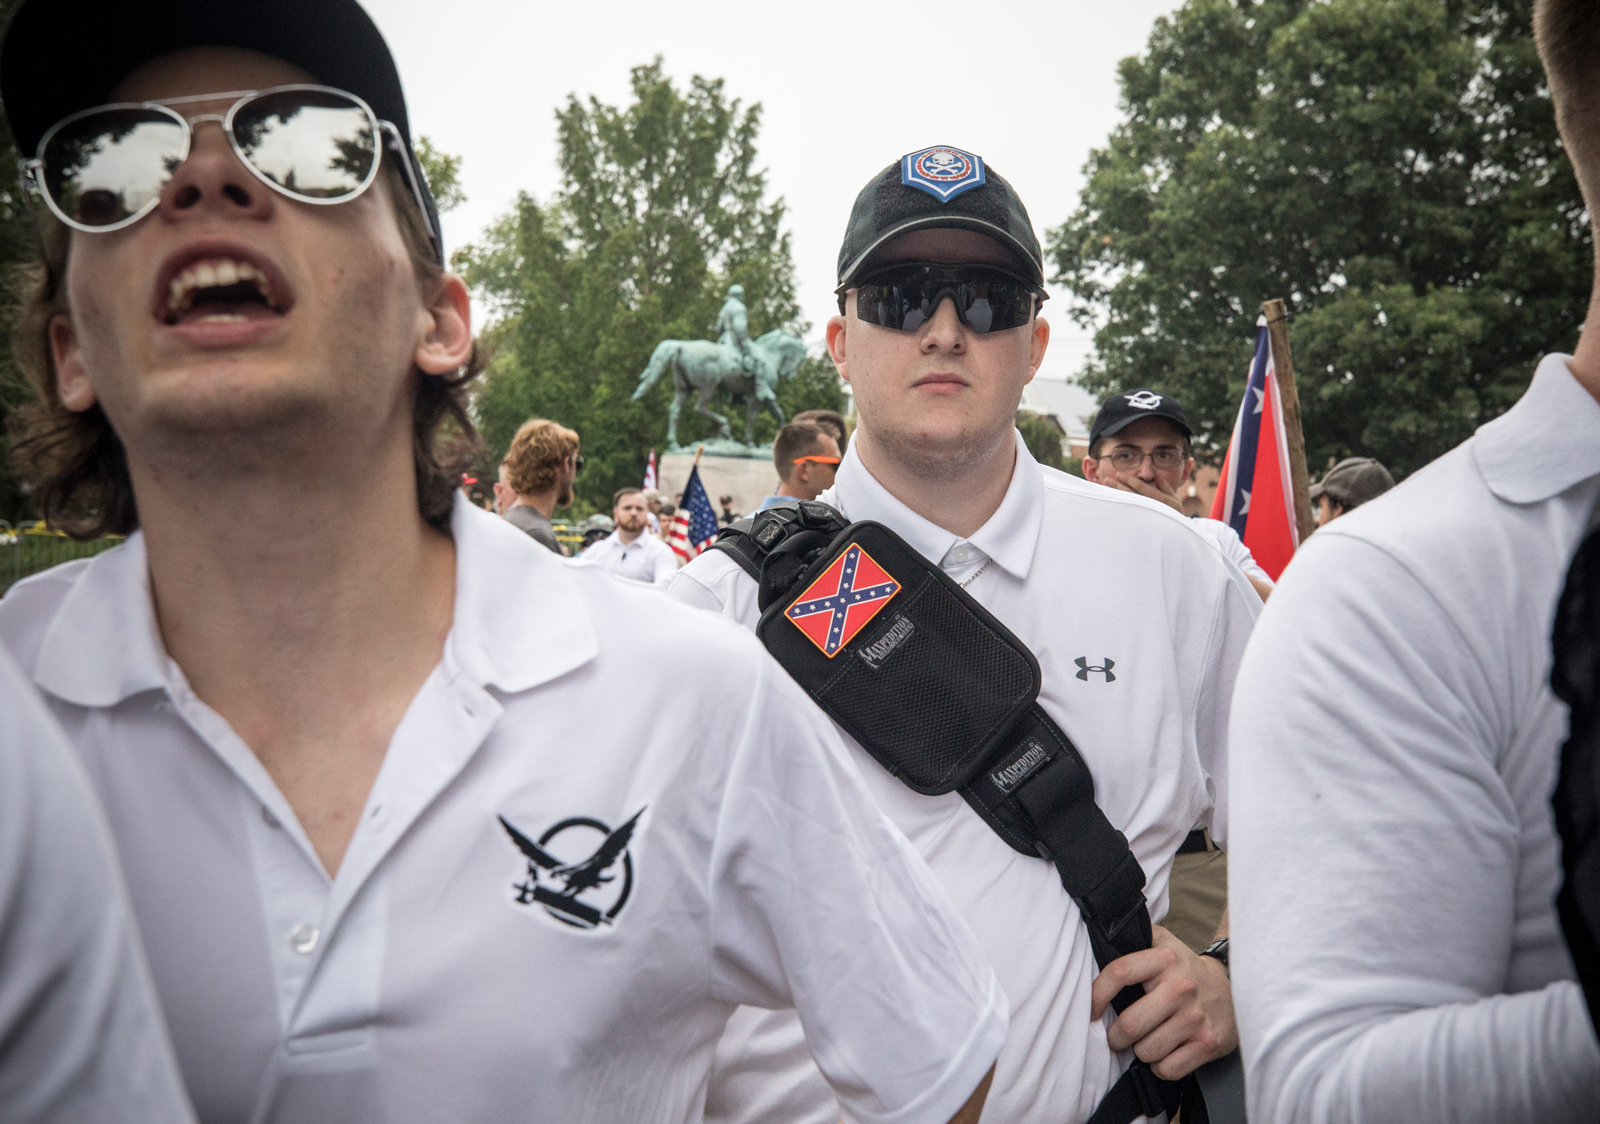 White supremacist groups rallying in Emancipation Park during the Unite the Right Rally, Charlottesville, Virginia, August 12, 2017